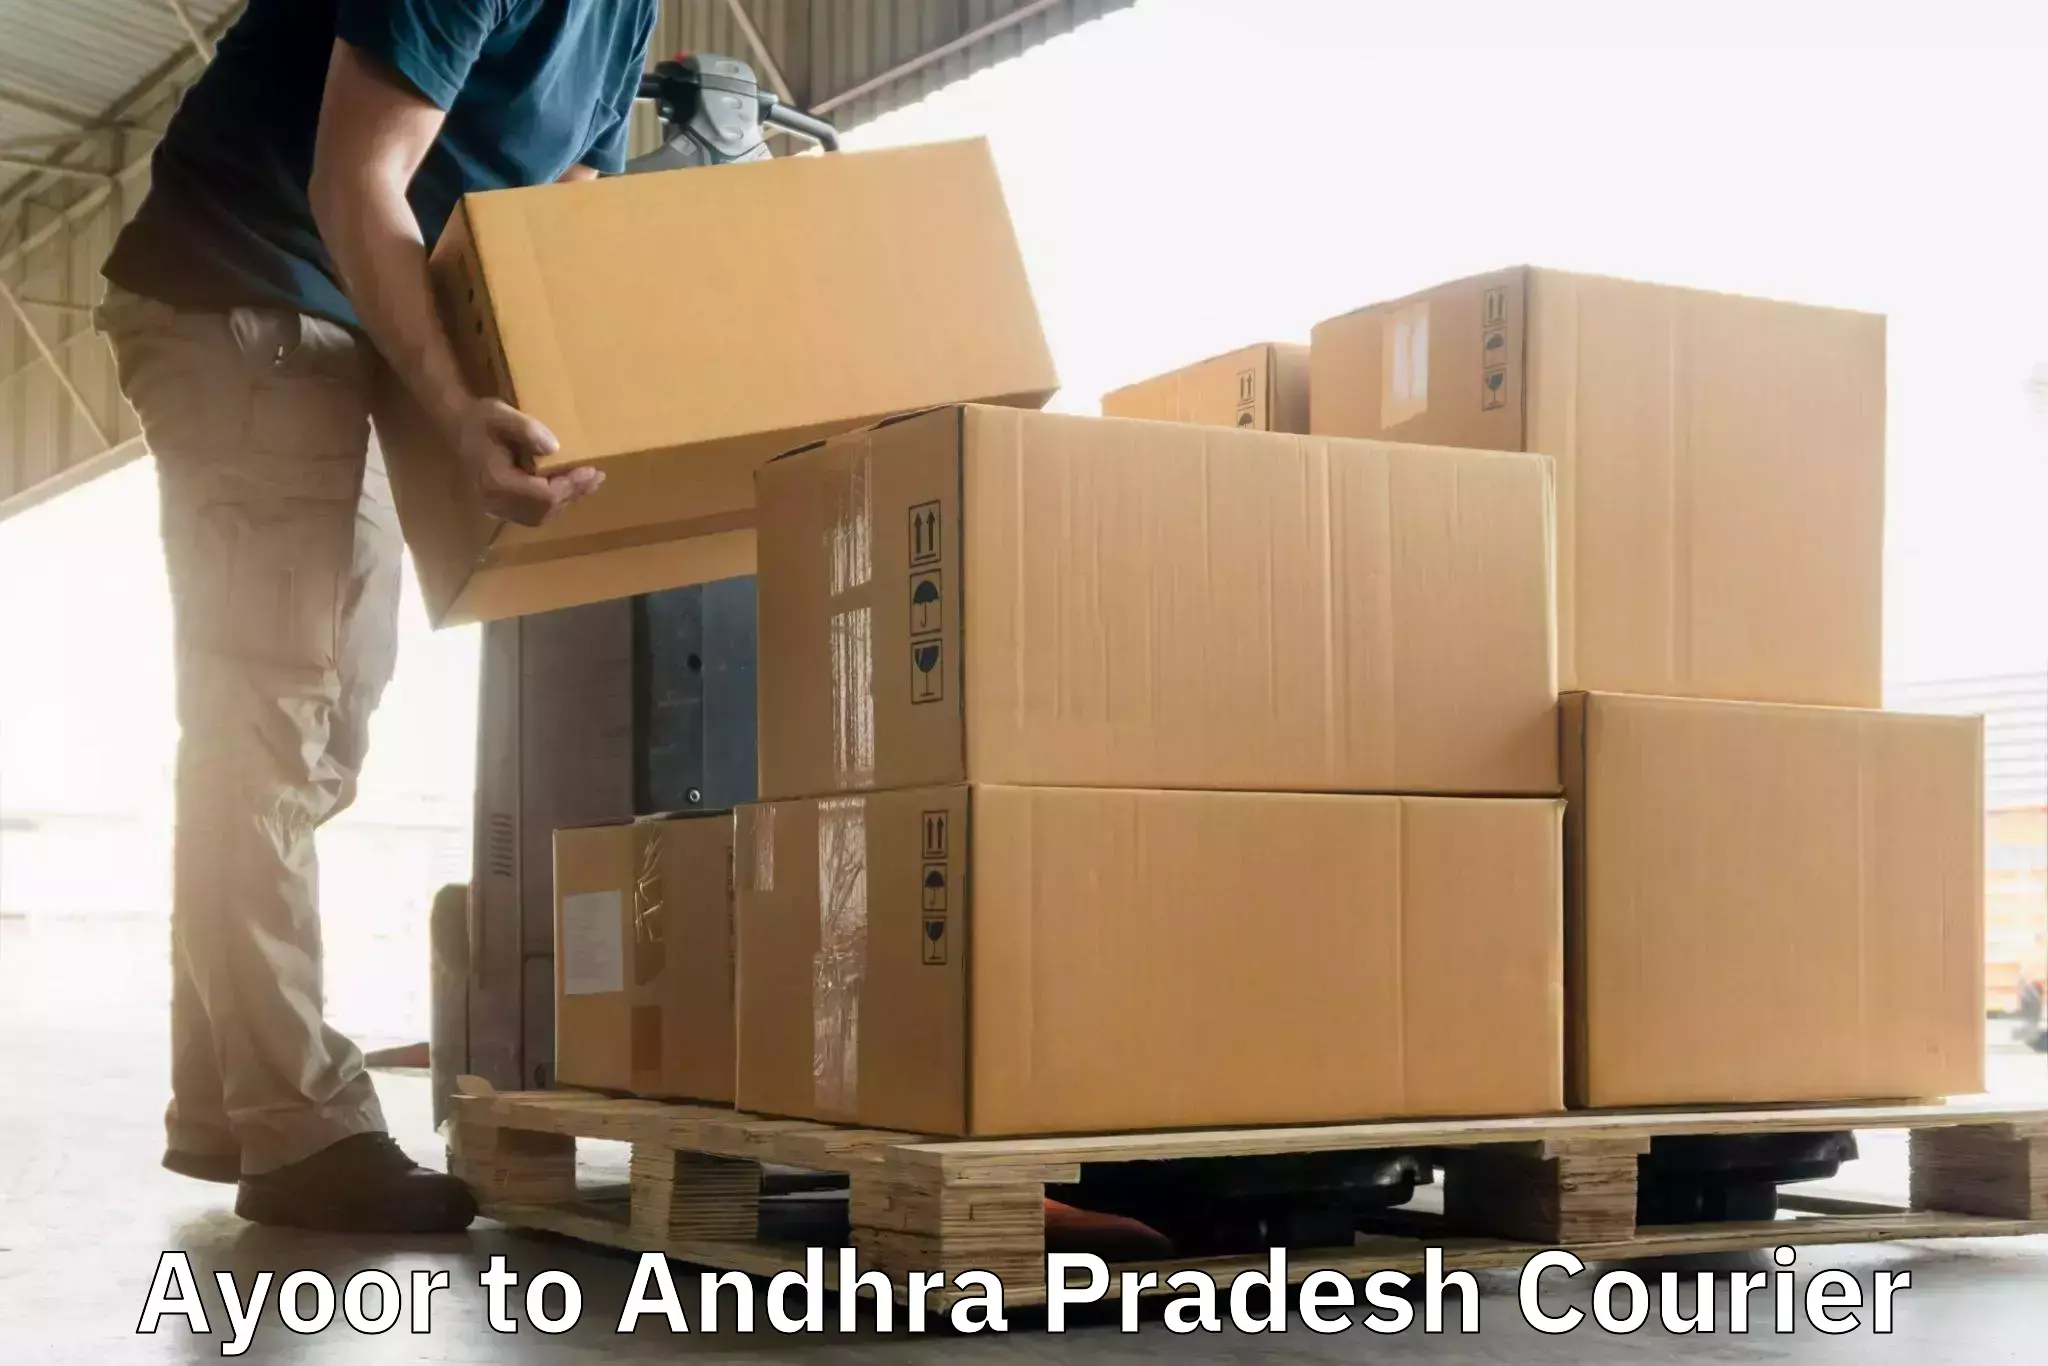 On-call courier service Ayoor to Mangalagiri